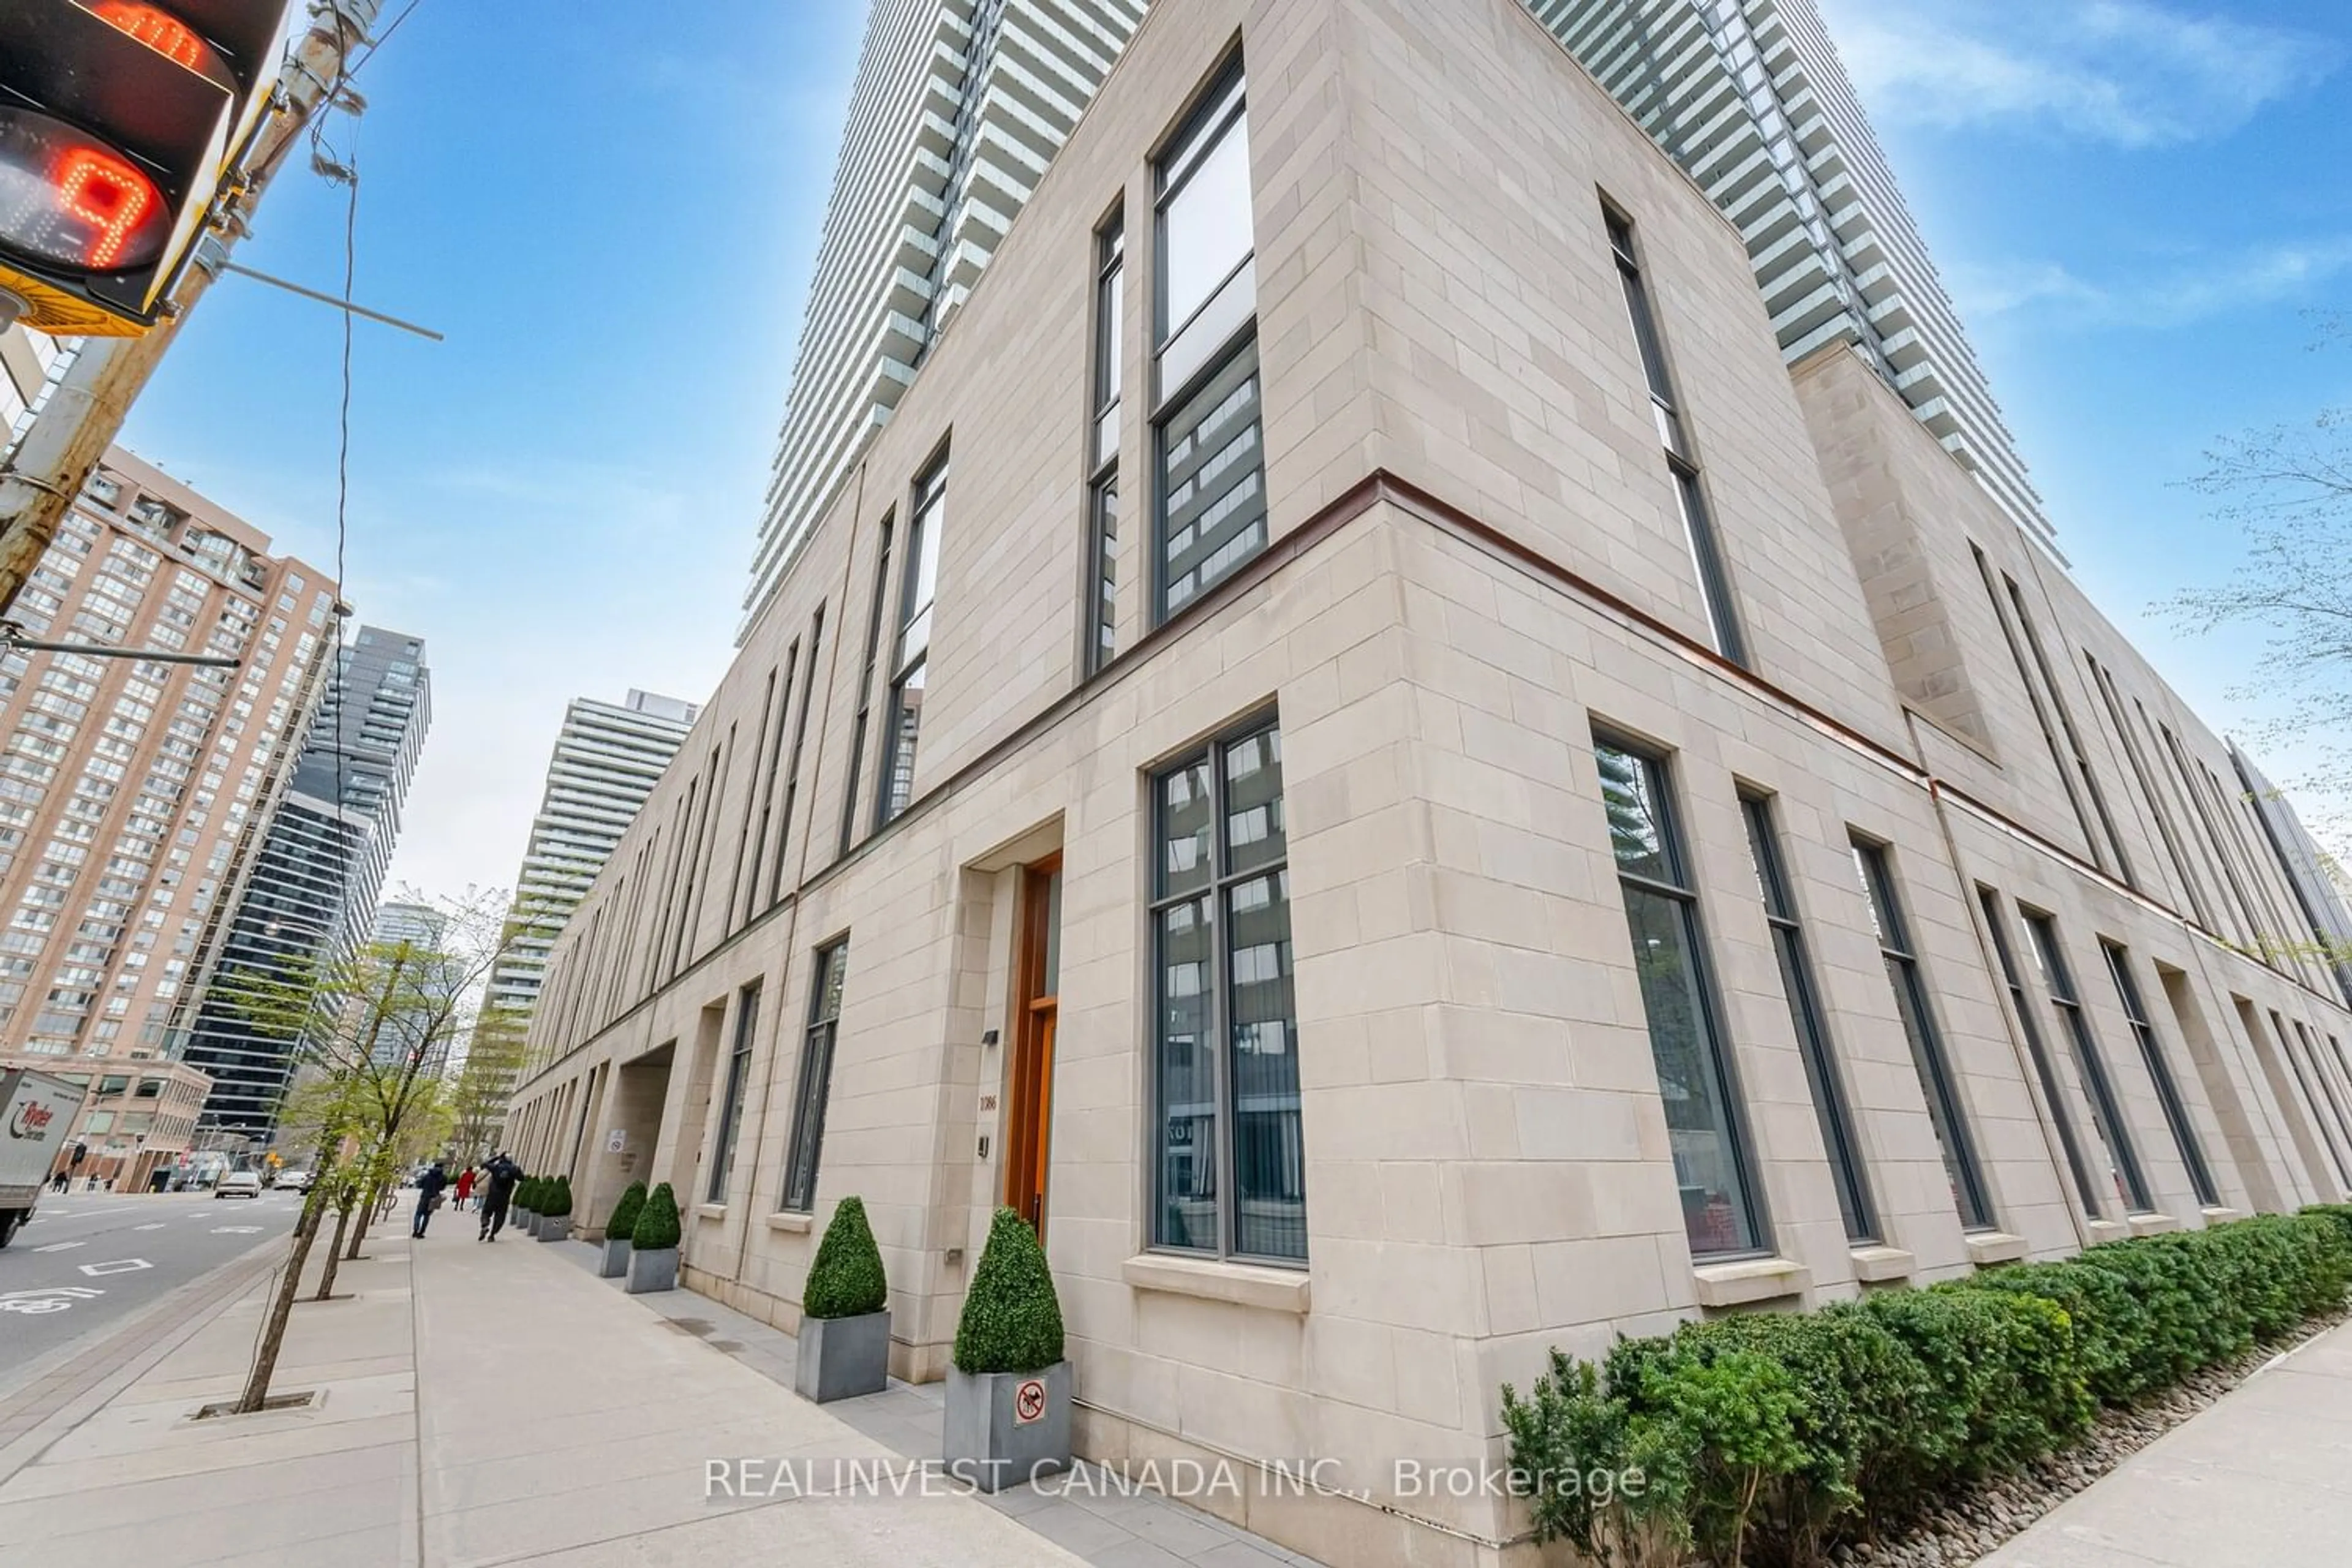 A pic from exterior of the house or condo for 1086 Bay St #16, Toronto Ontario M5S 0A3